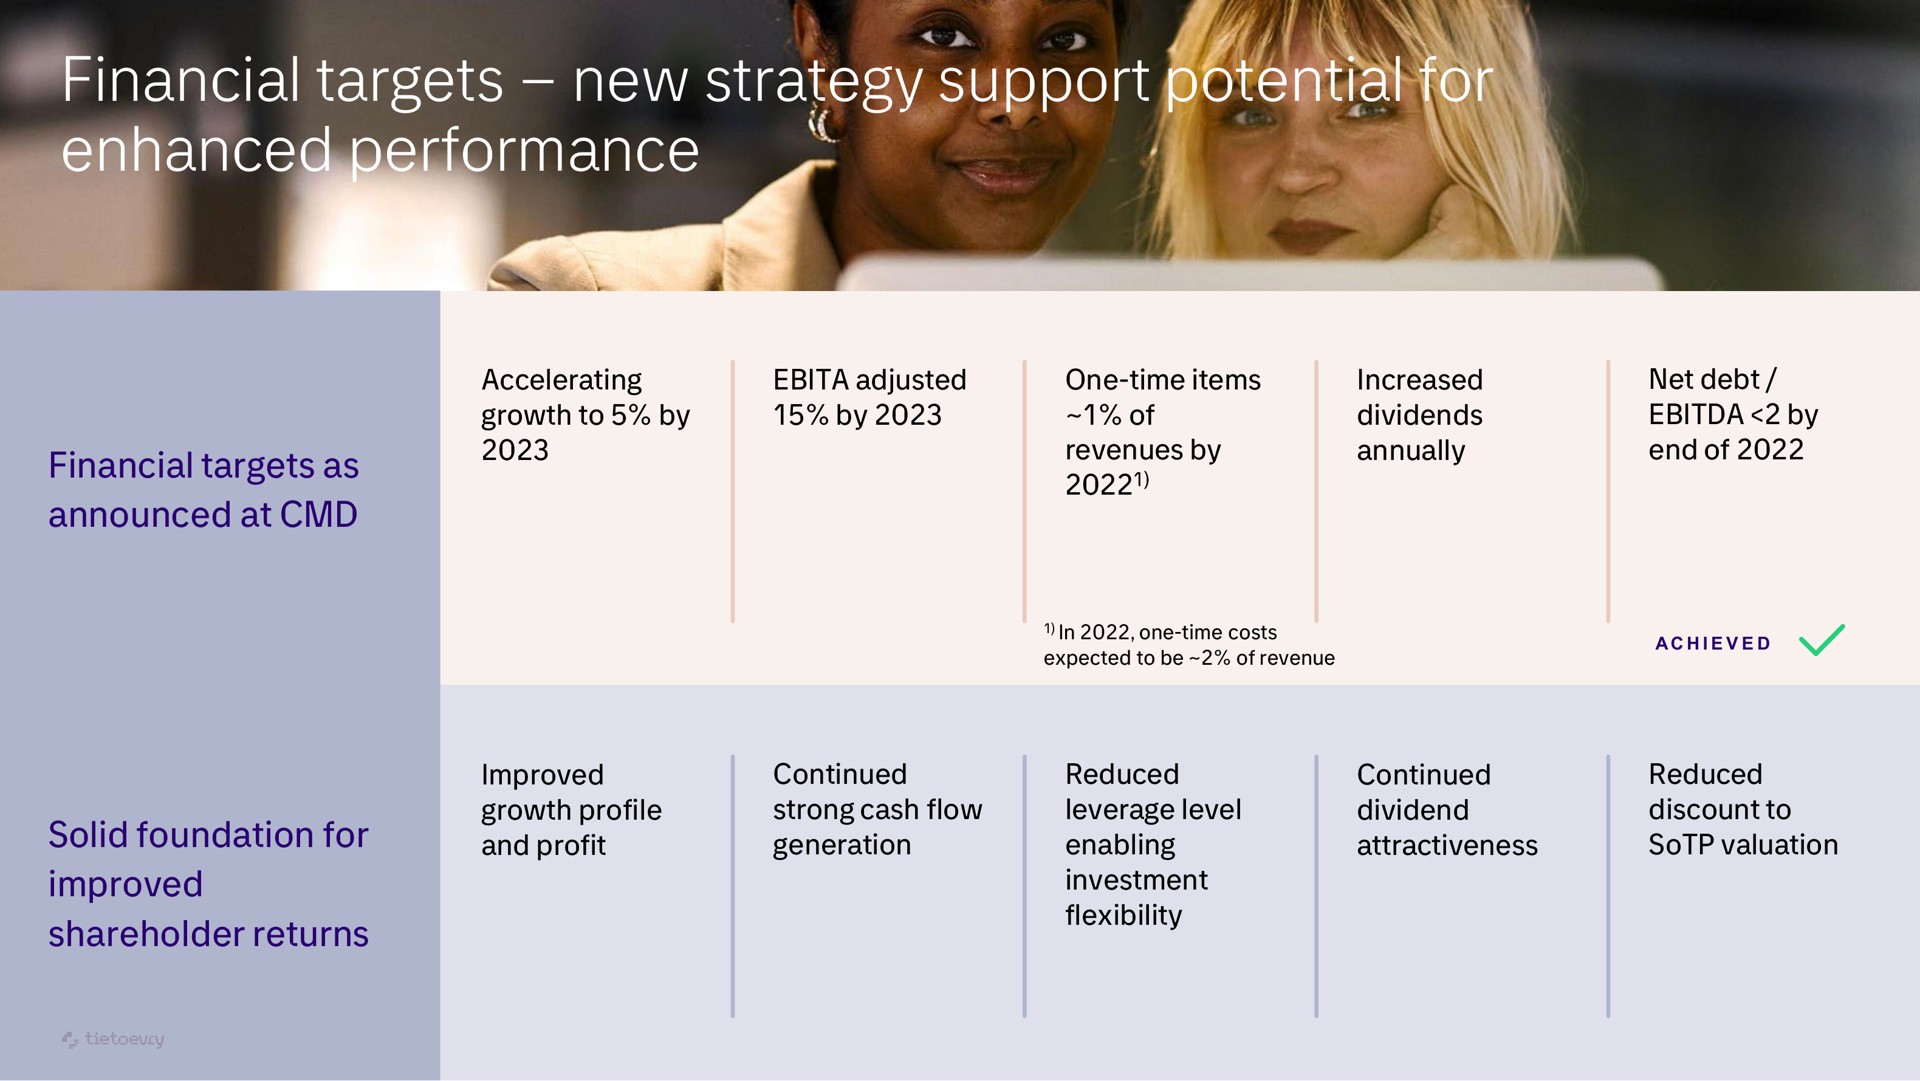 financial targets new strategy support potential for enhanced performance als | Tietoevry